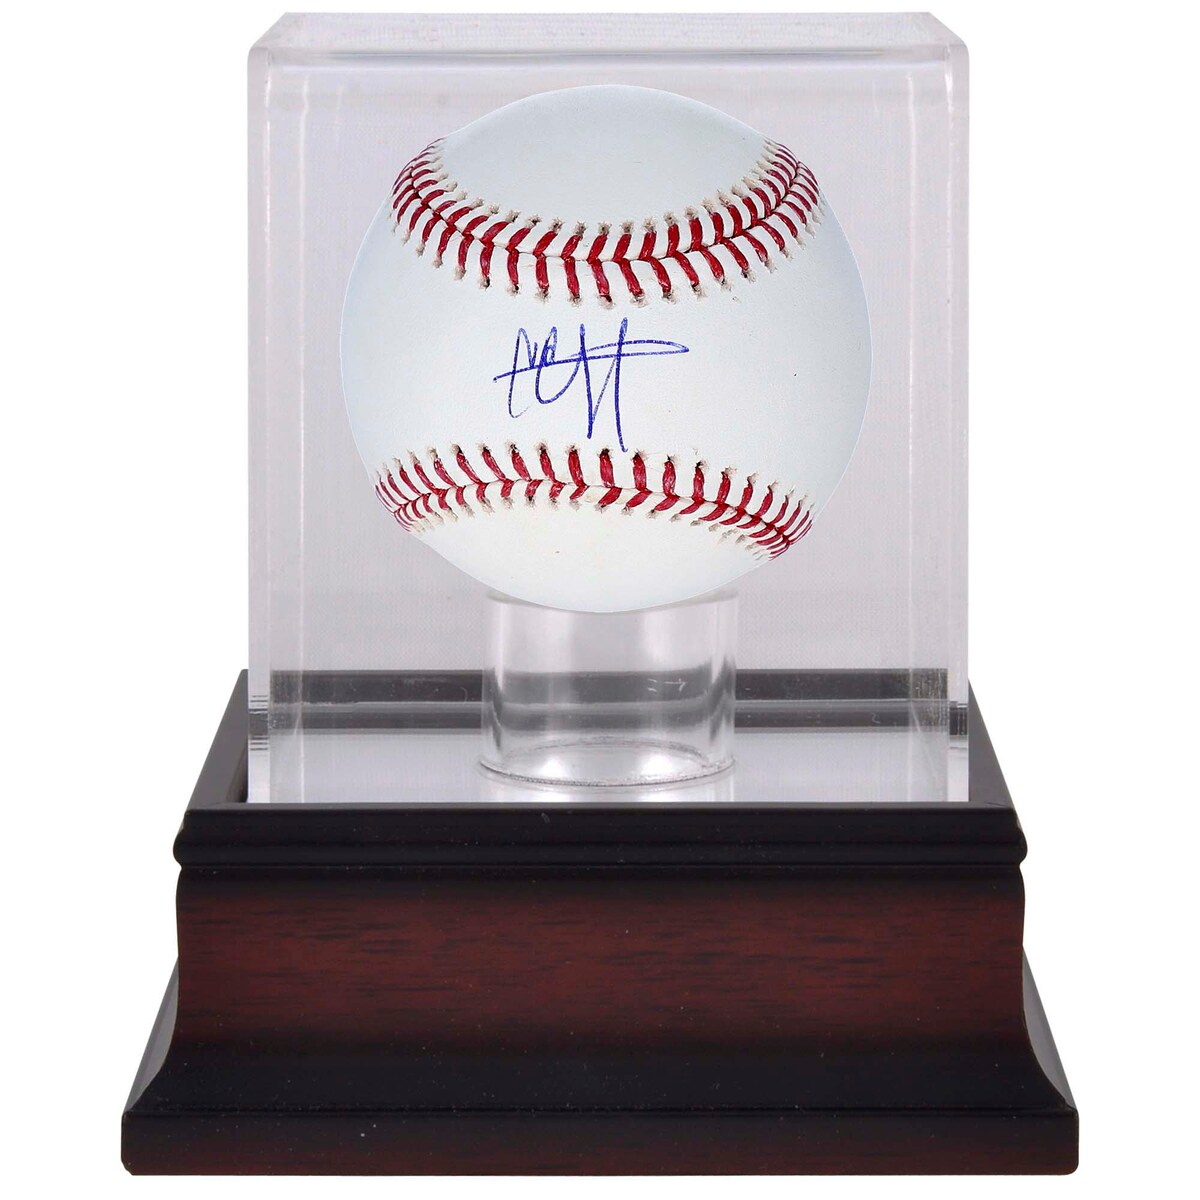 Autographed by CC Sabathia, this Baseball & Mahogany Baseball Display Case is ready to boost your New York Yankees memor...